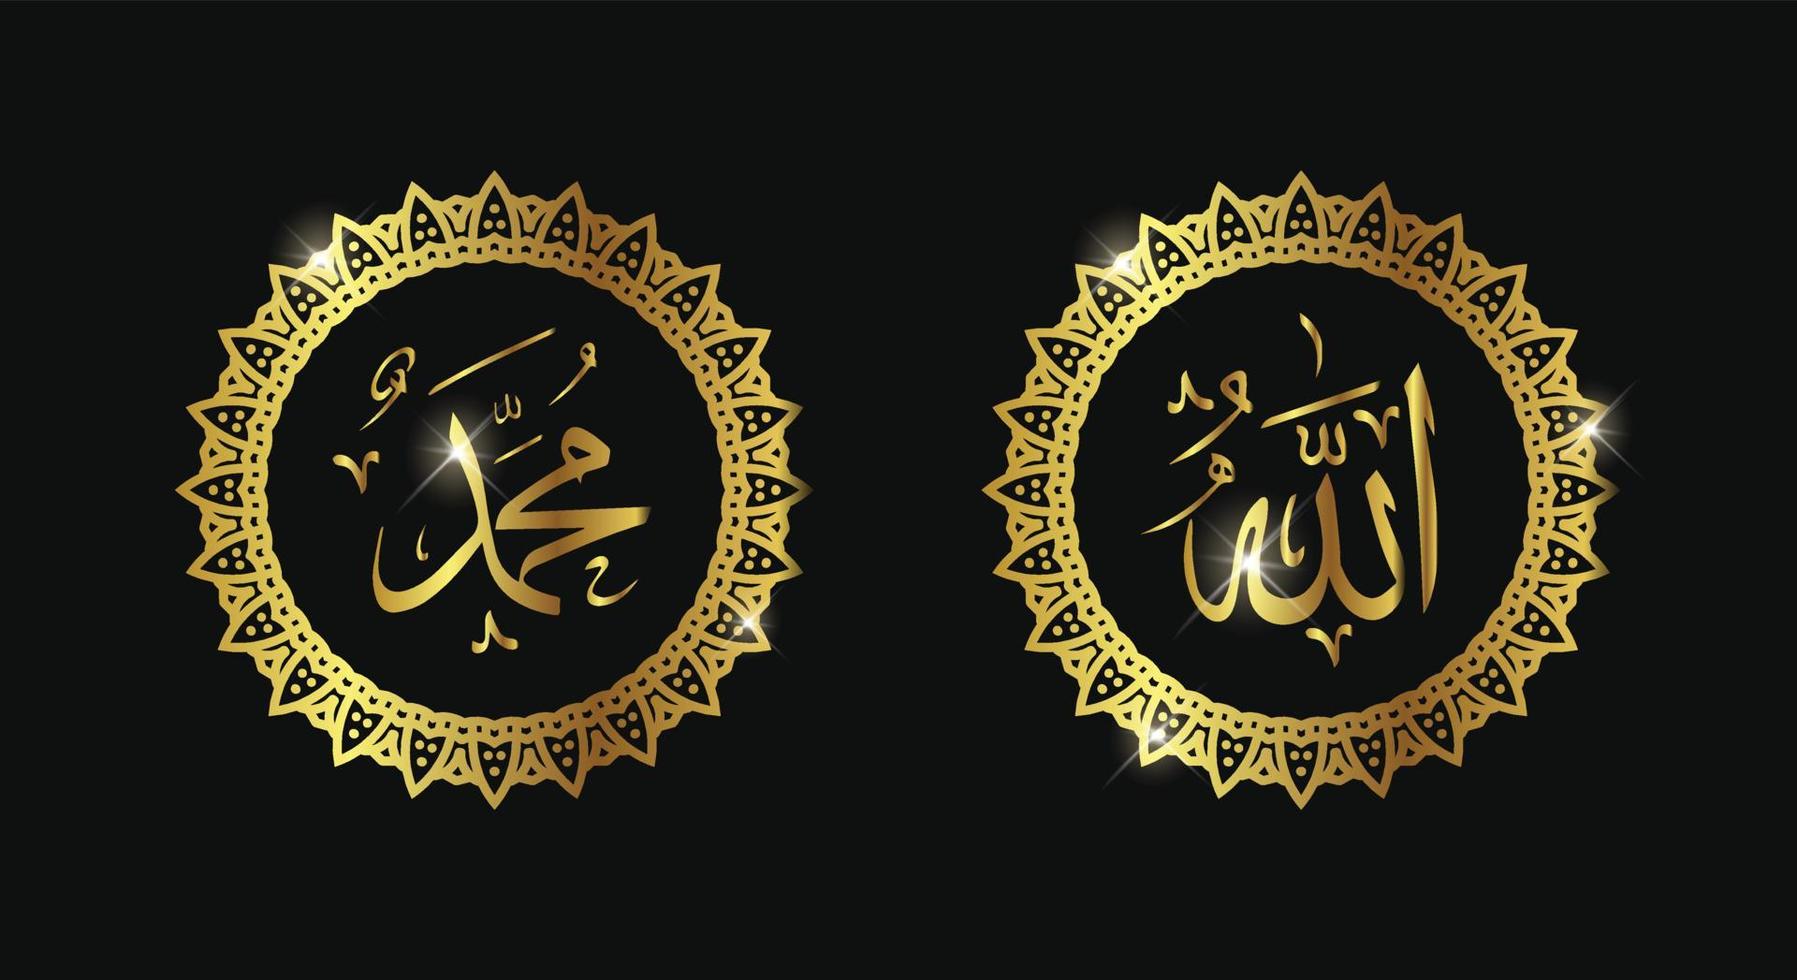 allah muhammad with circle frame and gold color or luxury color vector